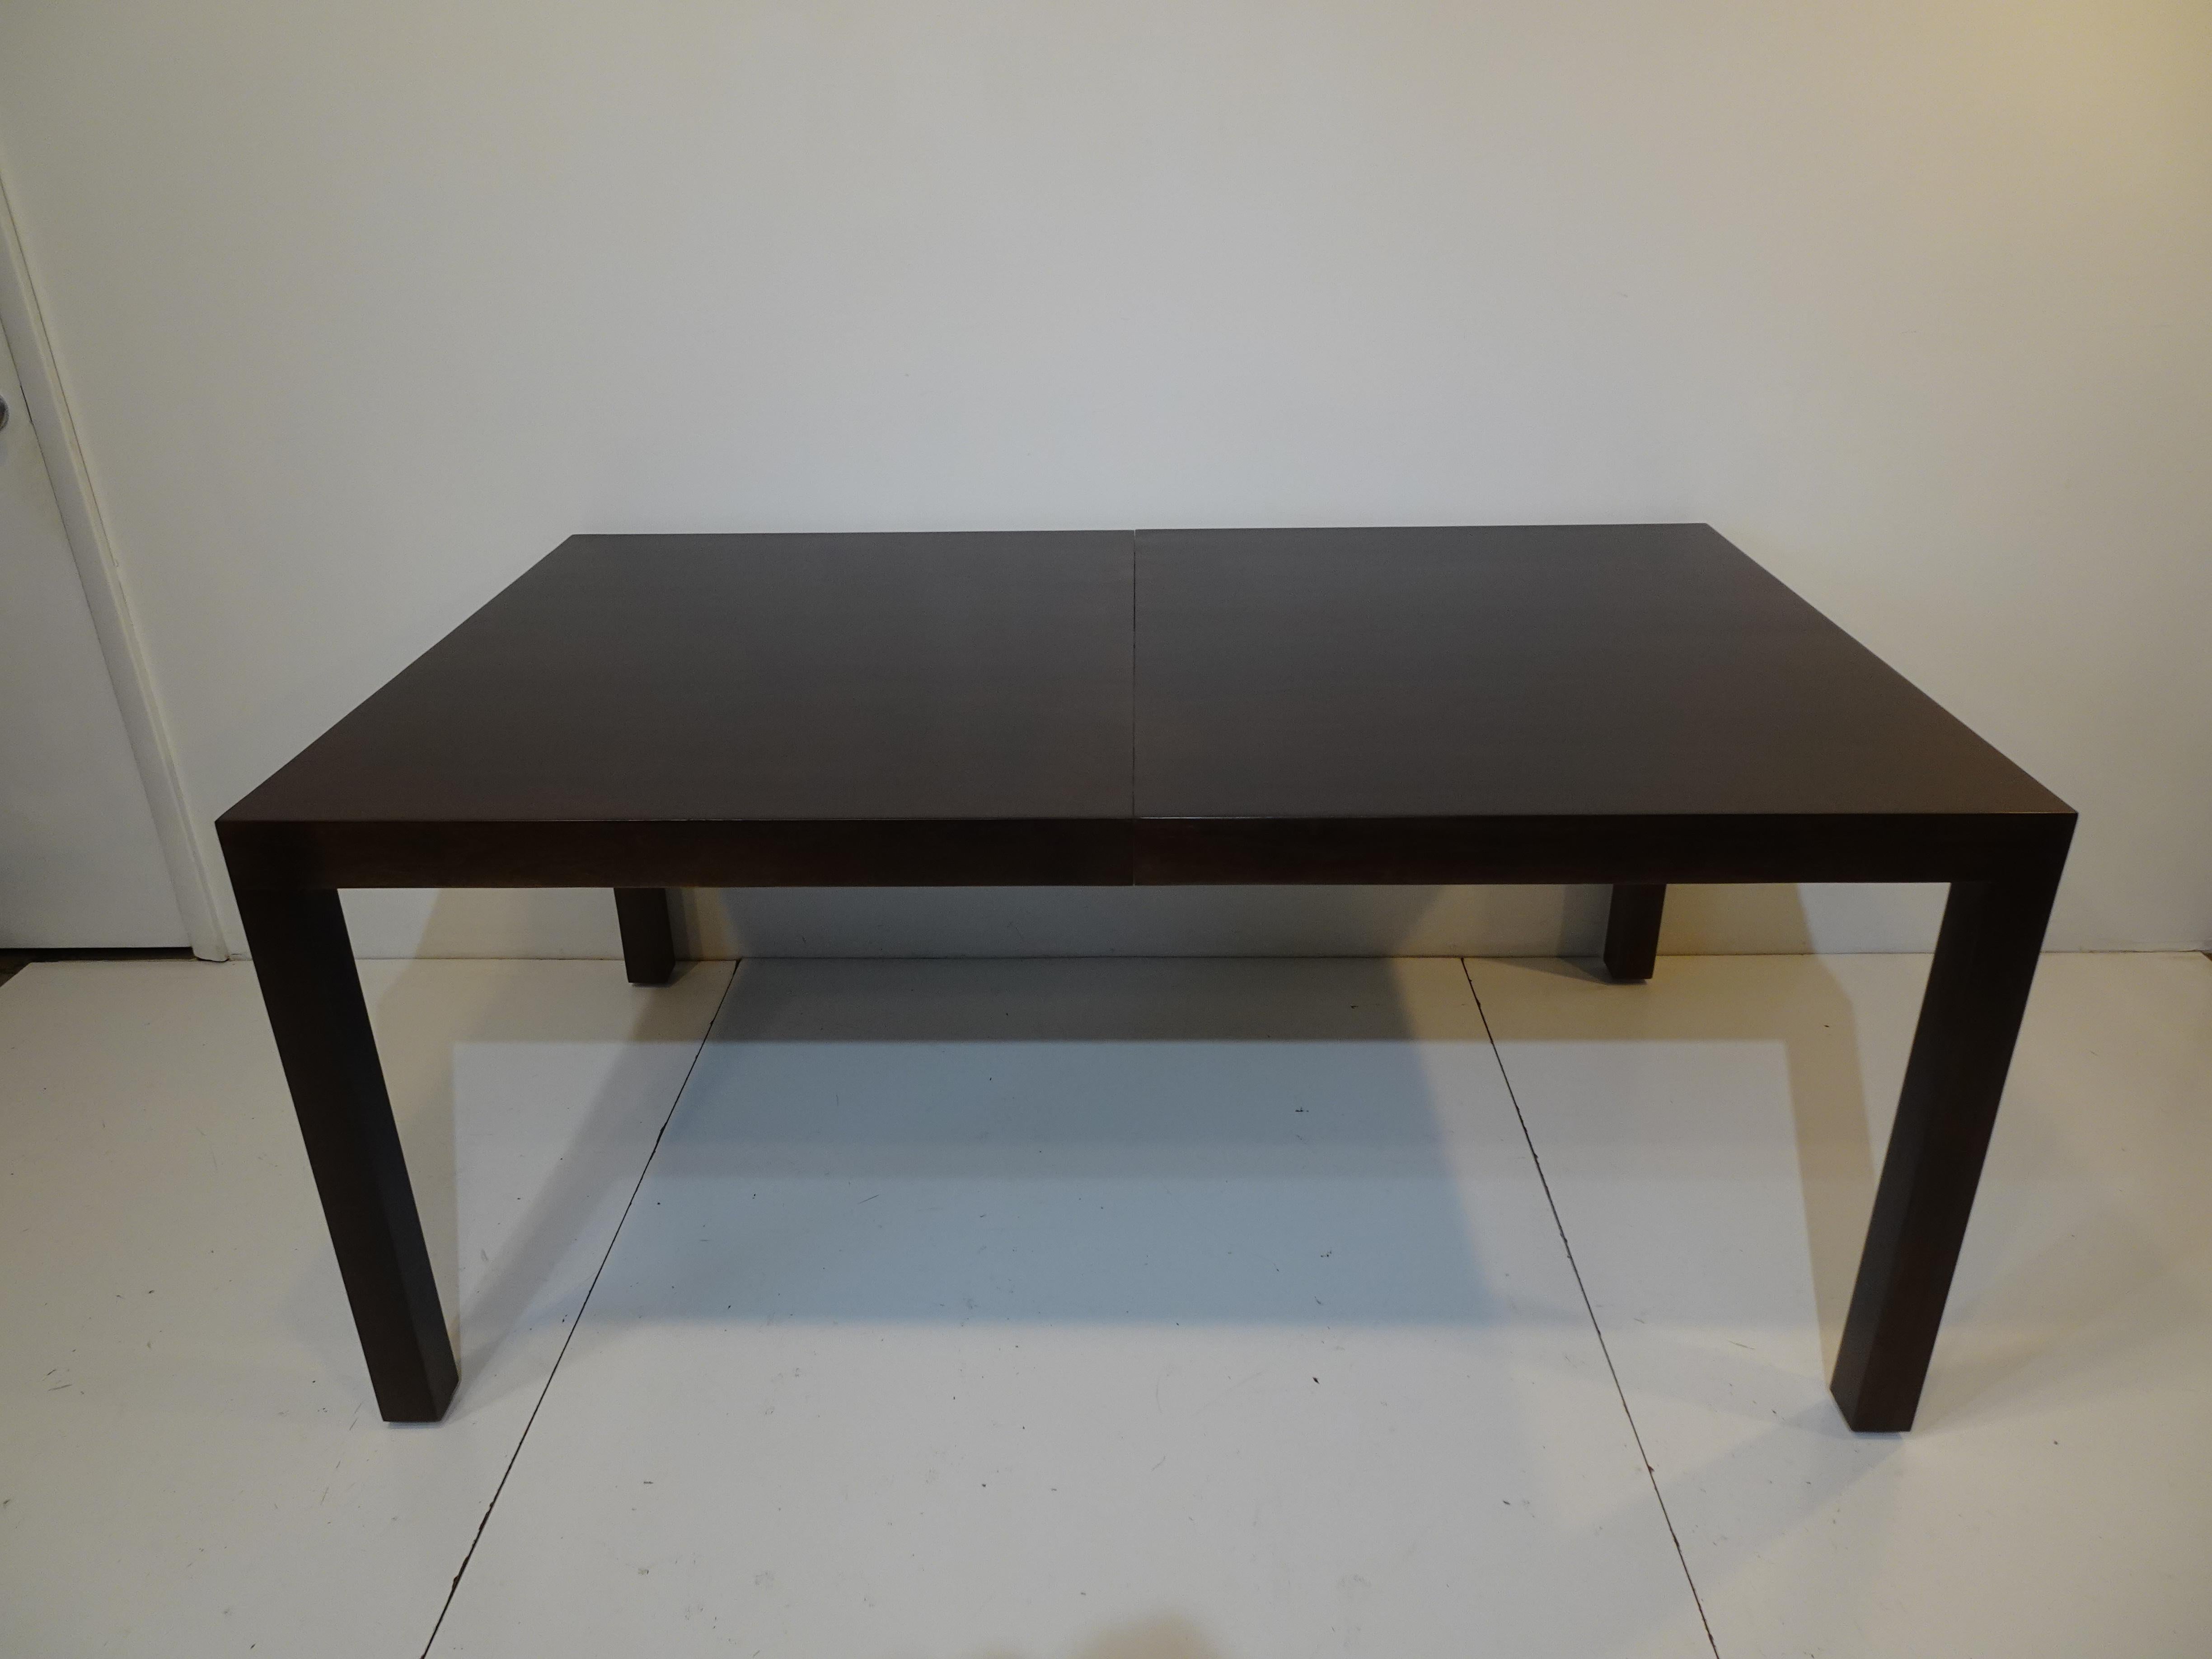 A parson styled dining table with three 15